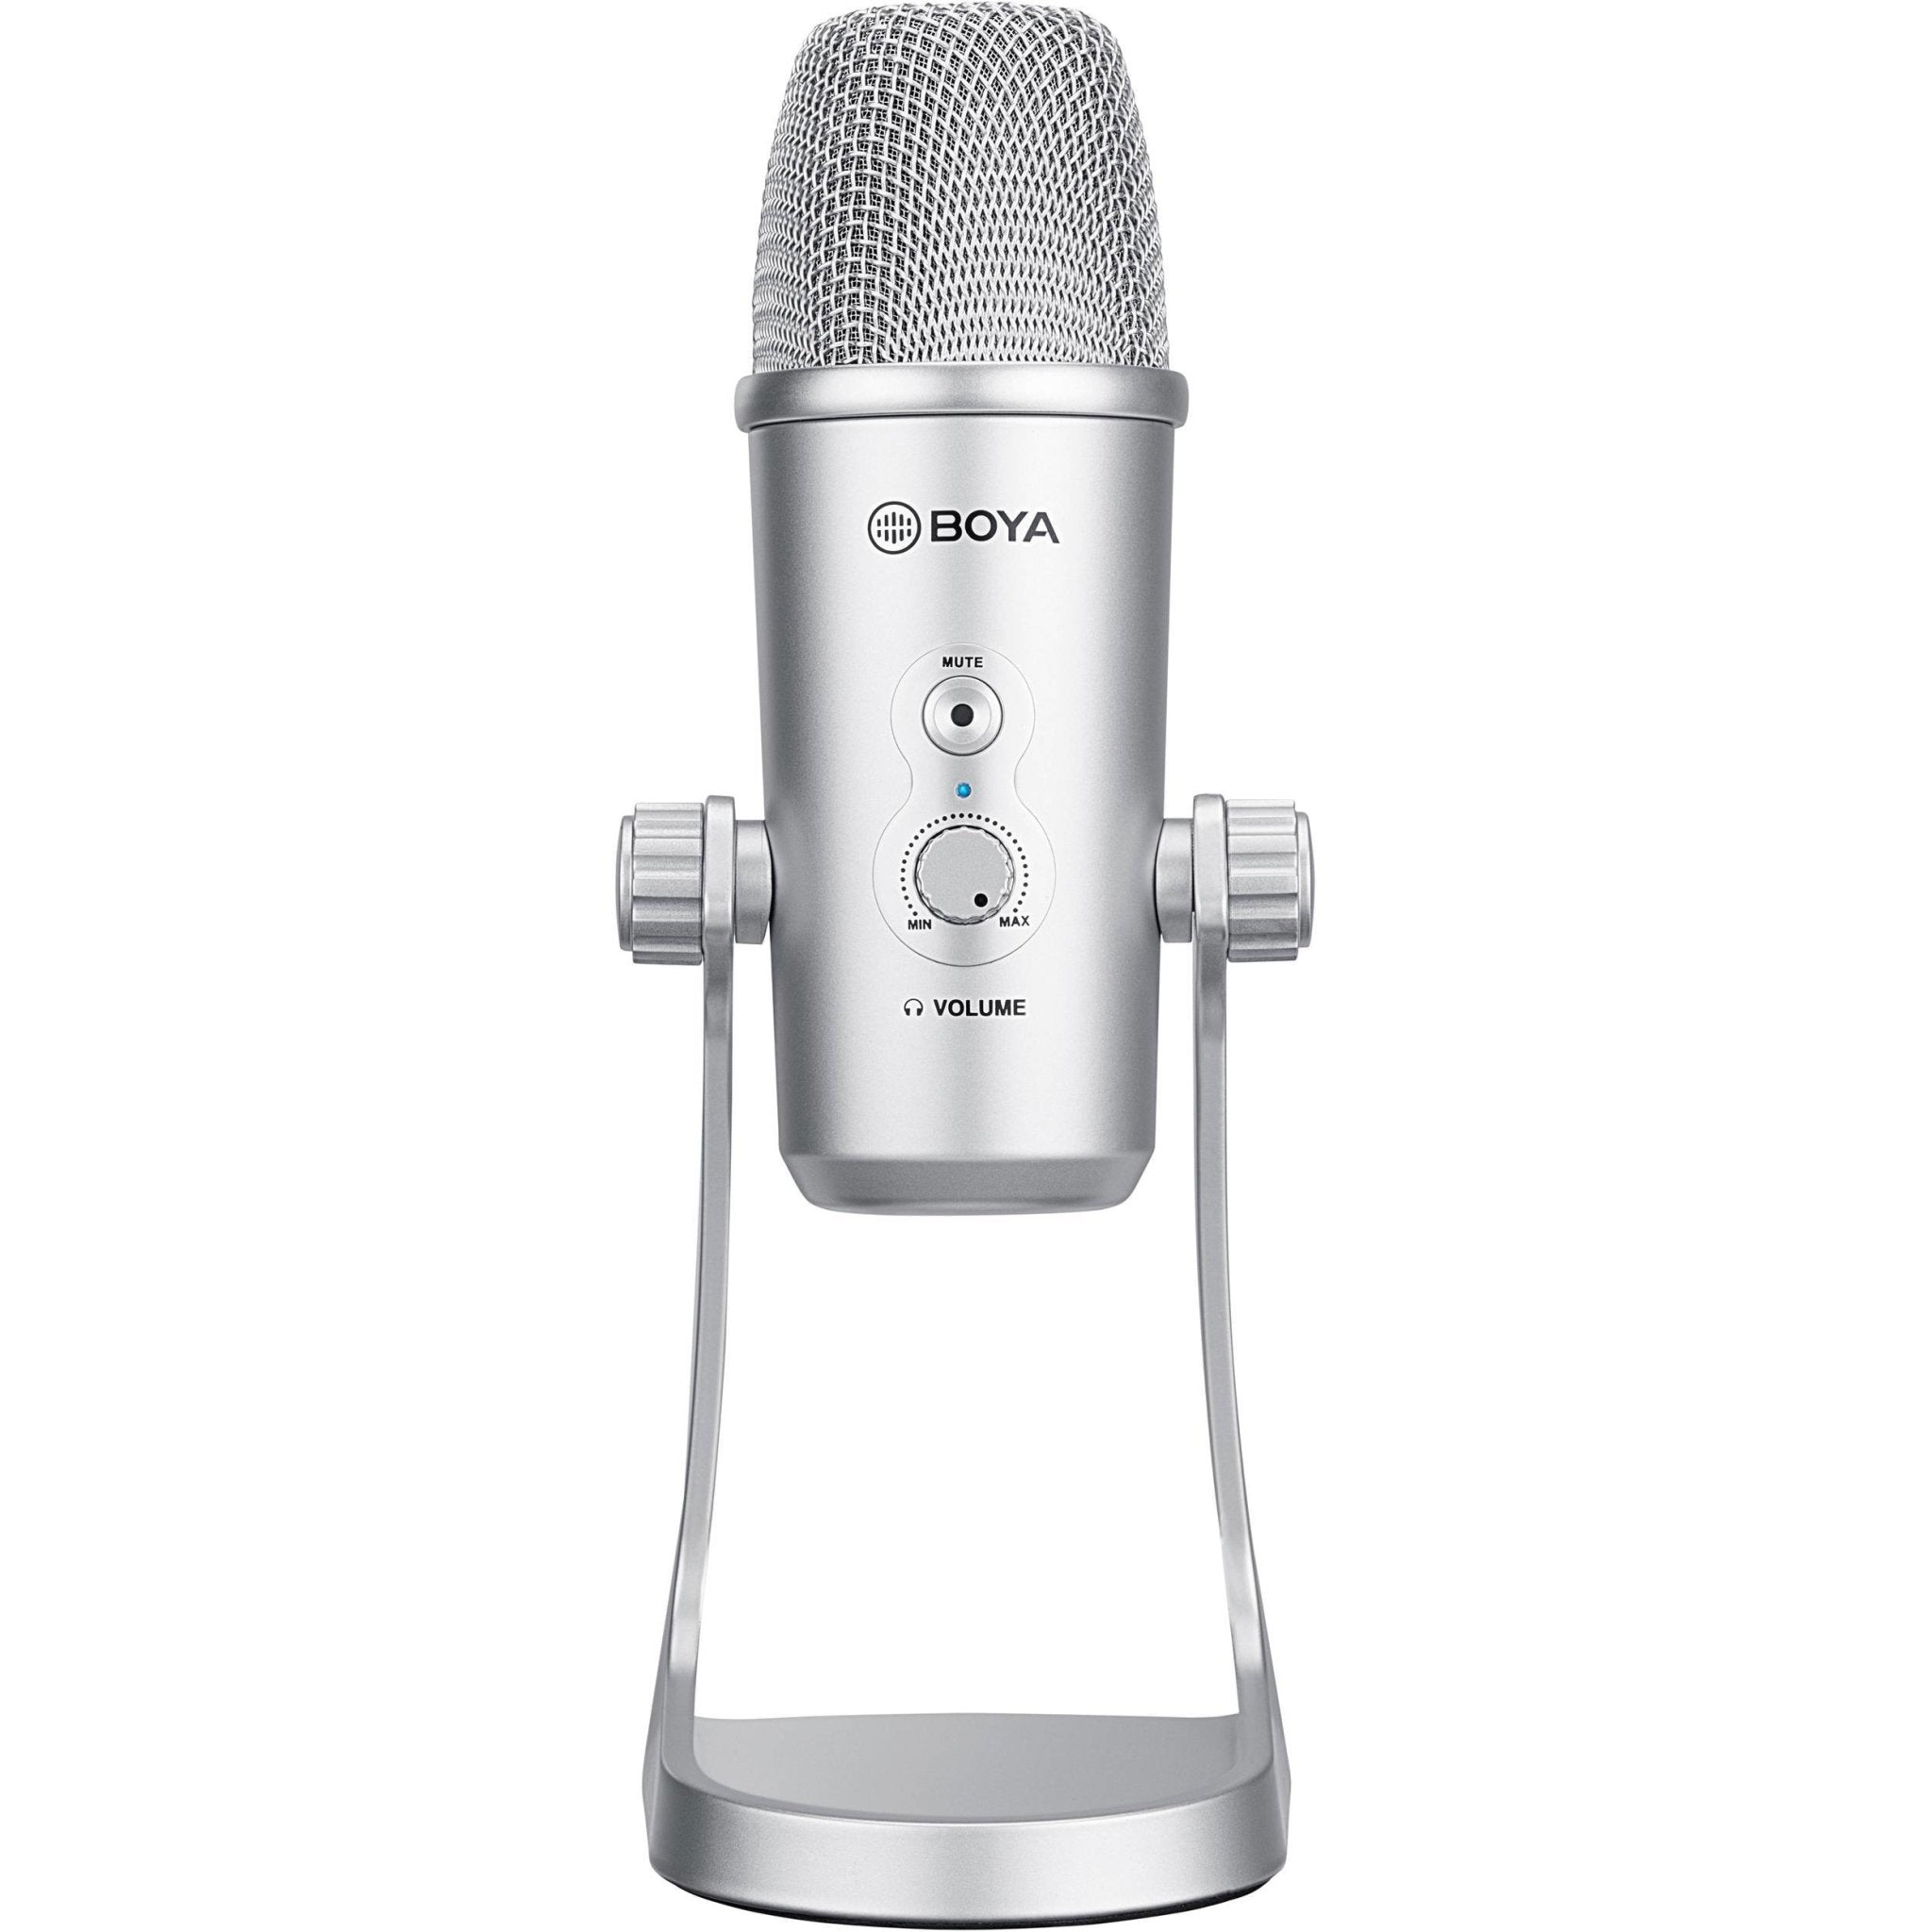 Boya BY-PM700SP Multipattern Condenser Microphone - Store 974 | ستور ٩٧٤